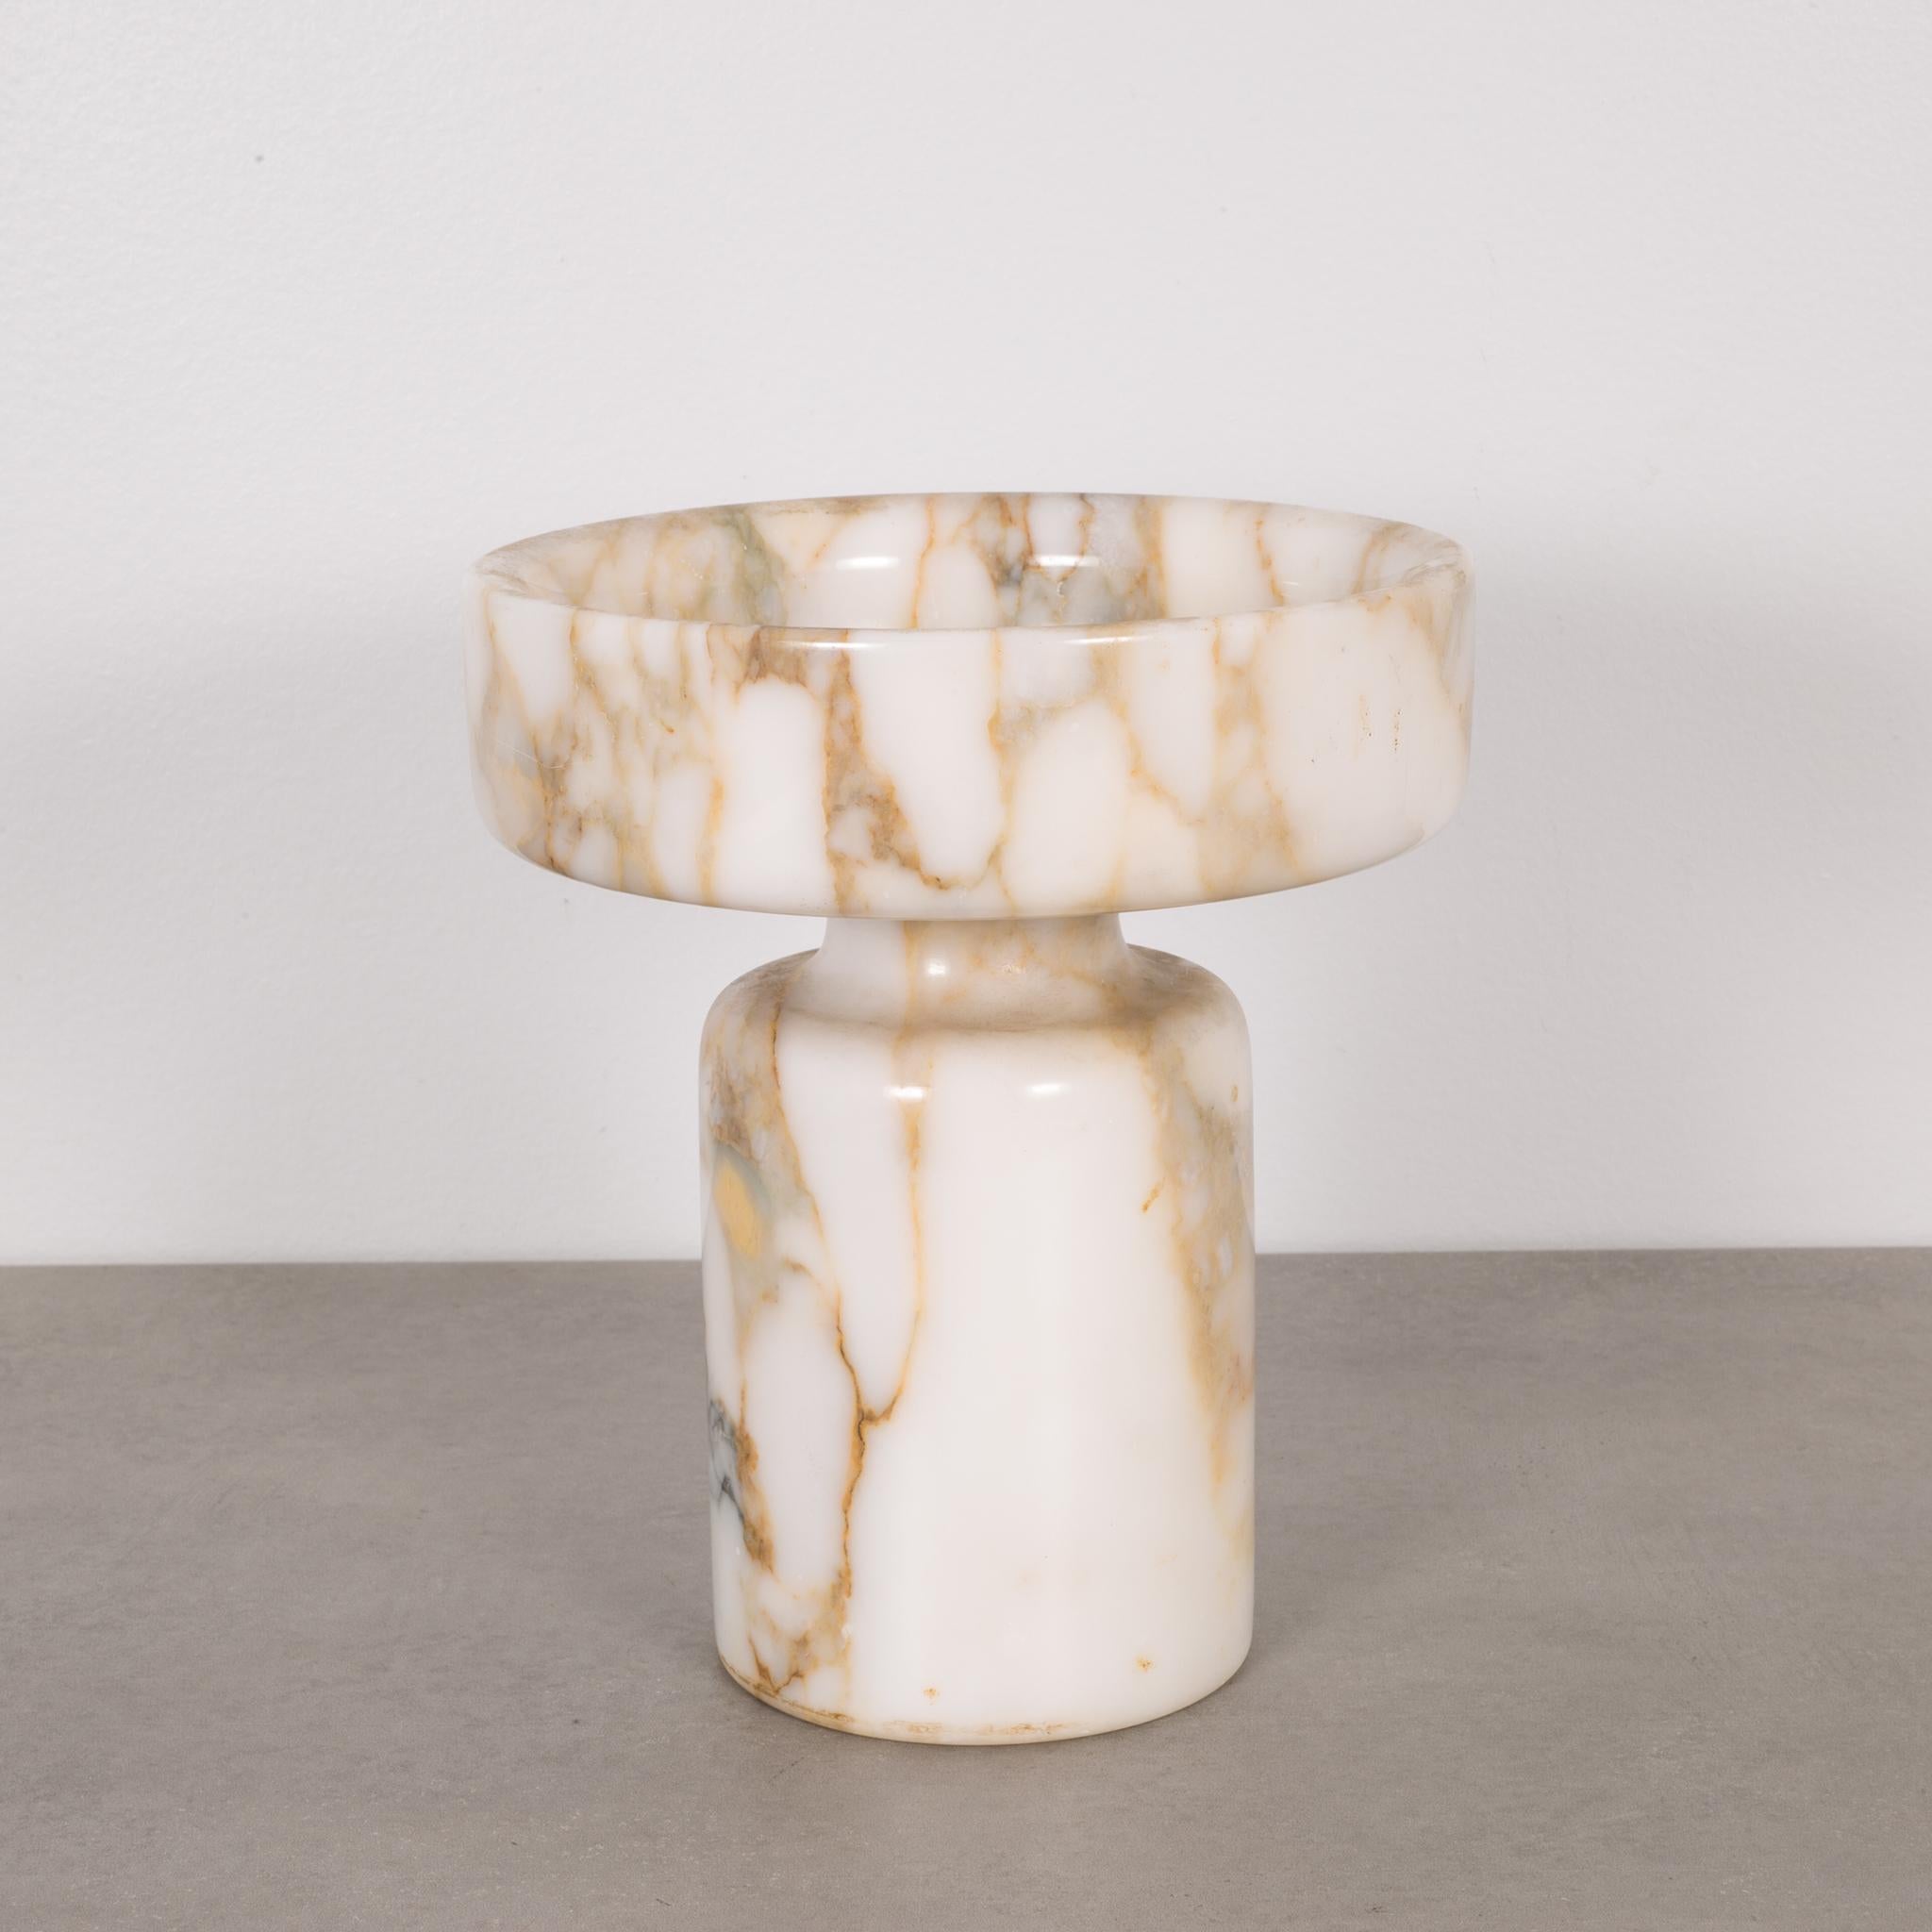 About

This is an original vase by Angelo Mangiarotti for Knoll International. This piece is reversible and can be used as a flower vase on one side or flip it over and use a a bowl. Made of solid Calacatta marble. A distinctive Italian marble of